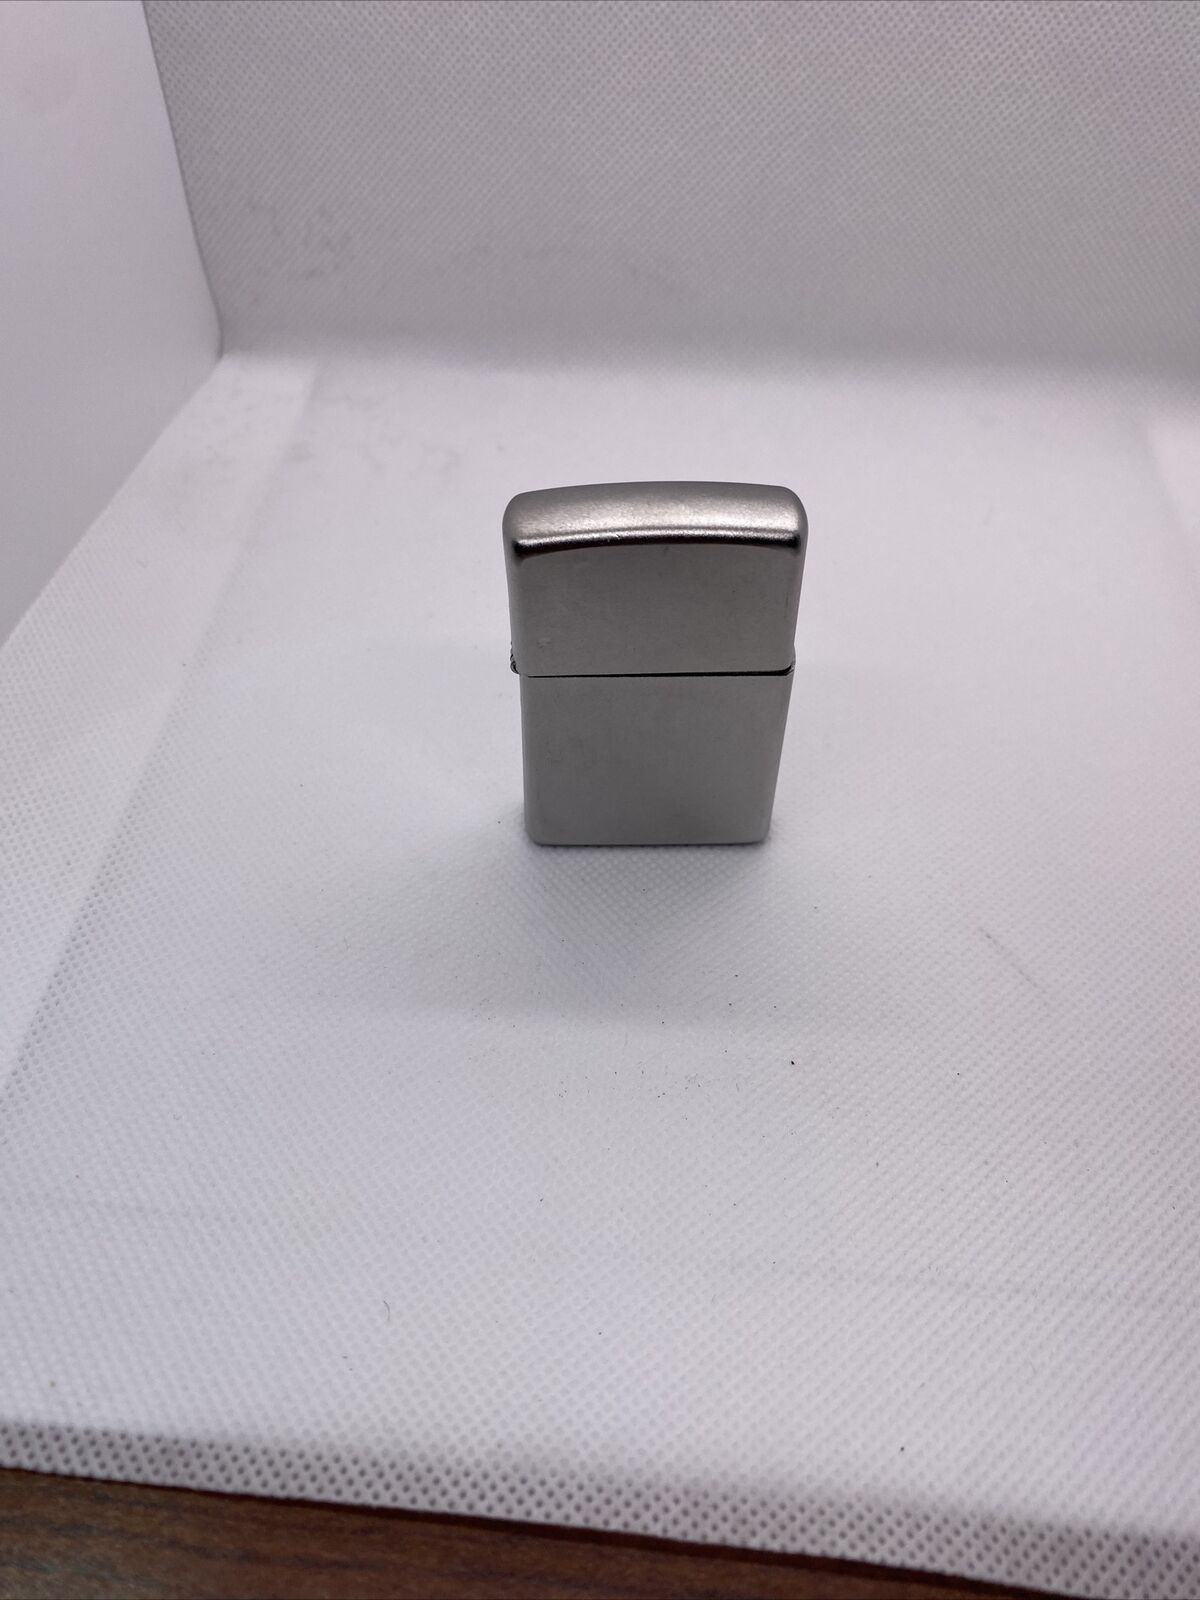 Zippo Lighter Jan 2013 Brushed Silver Tone Hinge Appear To Be Bent  